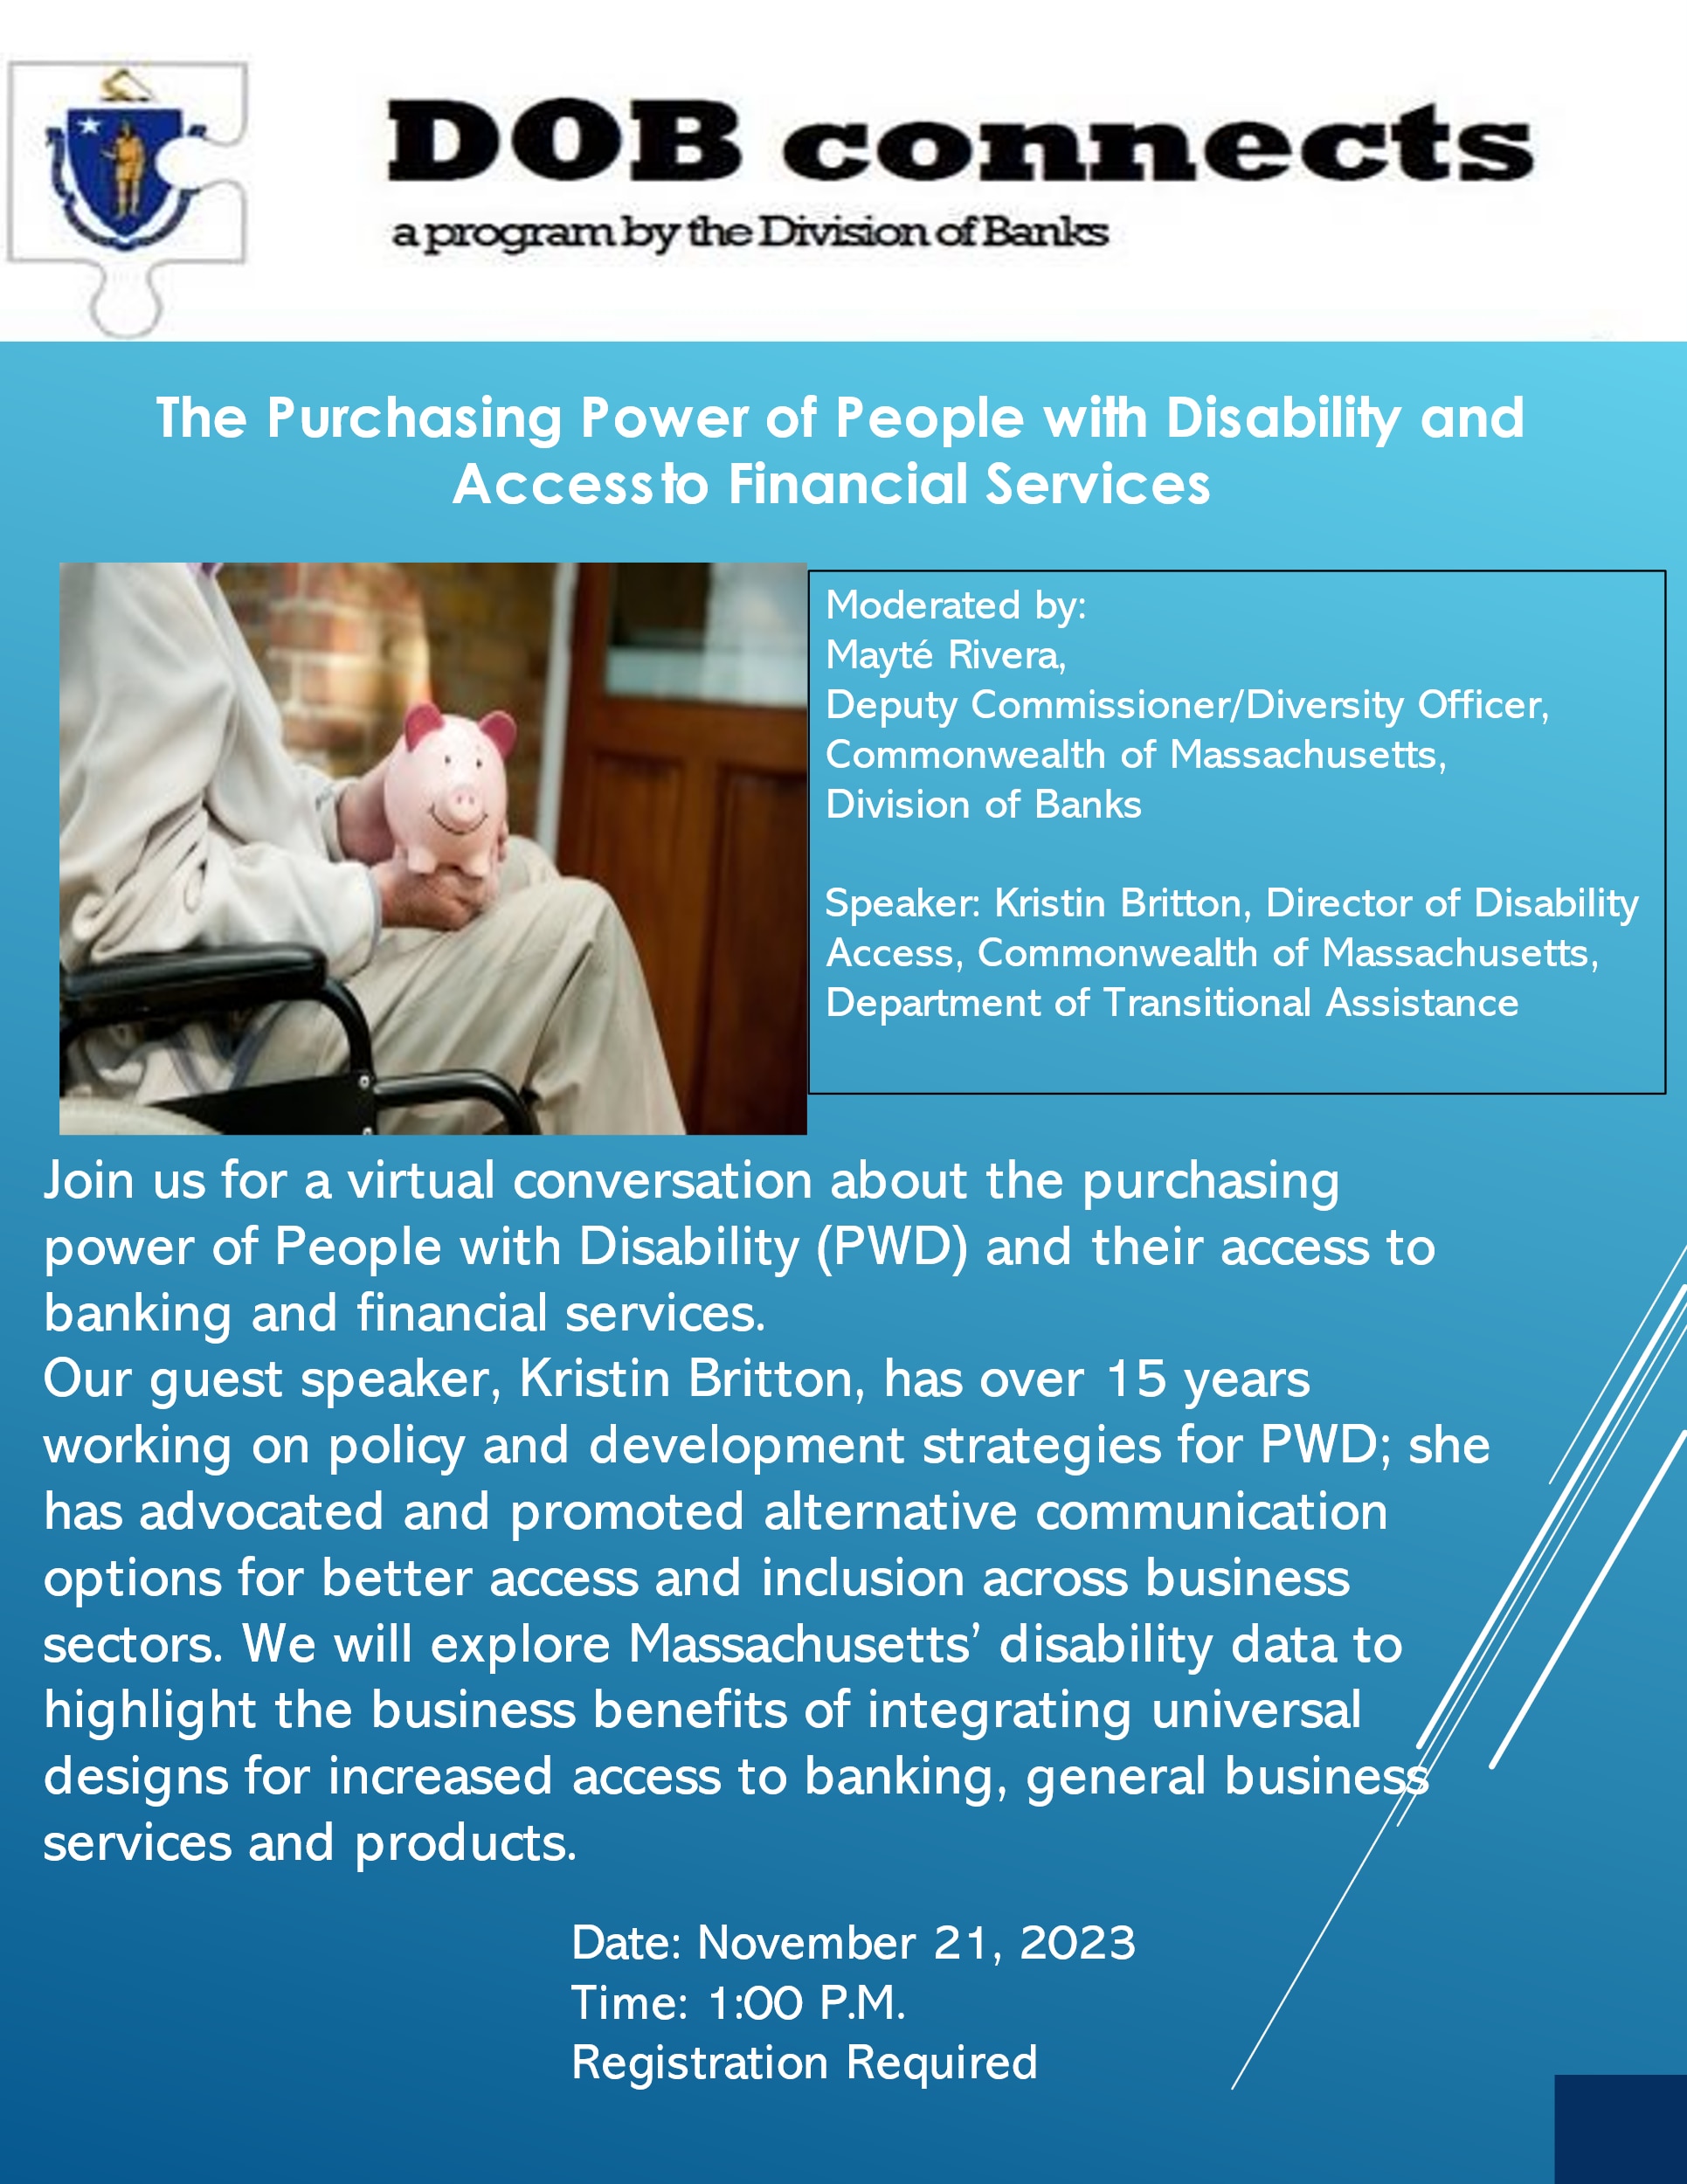 The Purchasing Power of People with Disability and Access to Financial Services